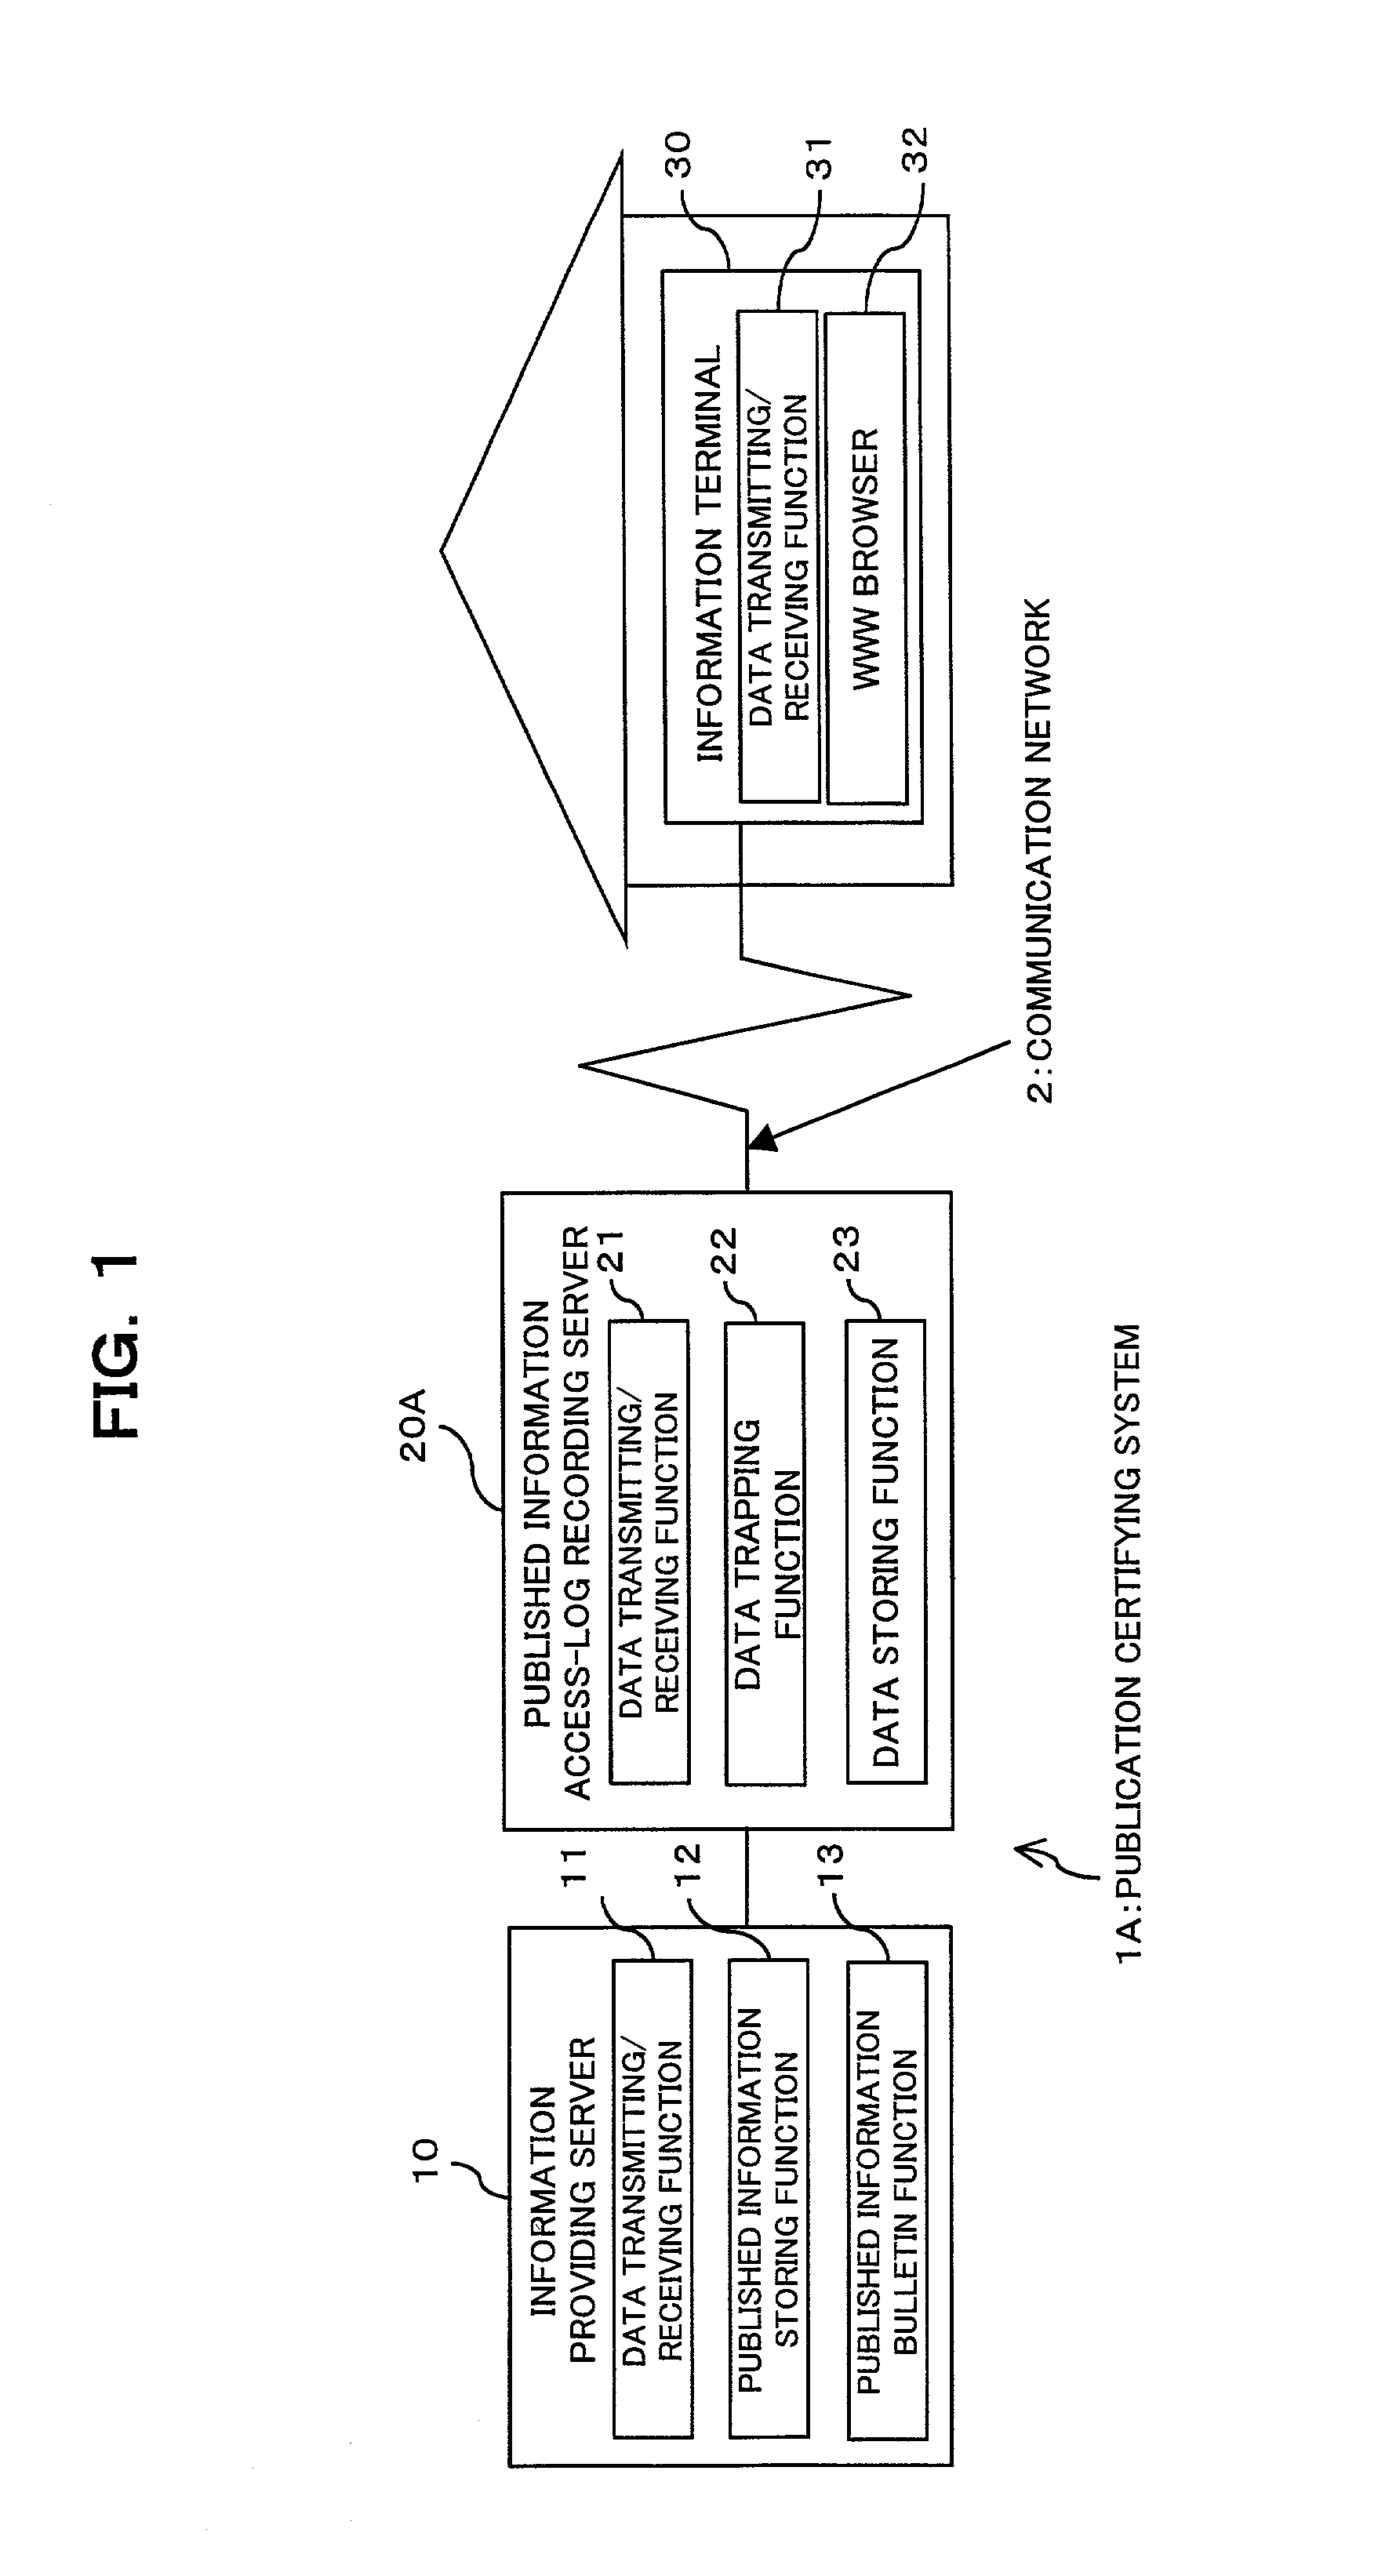 Publication certifying system, viewing-access-log recording server, publishing-access-log recording server, digital-signature server, and information terminal for access-to-view